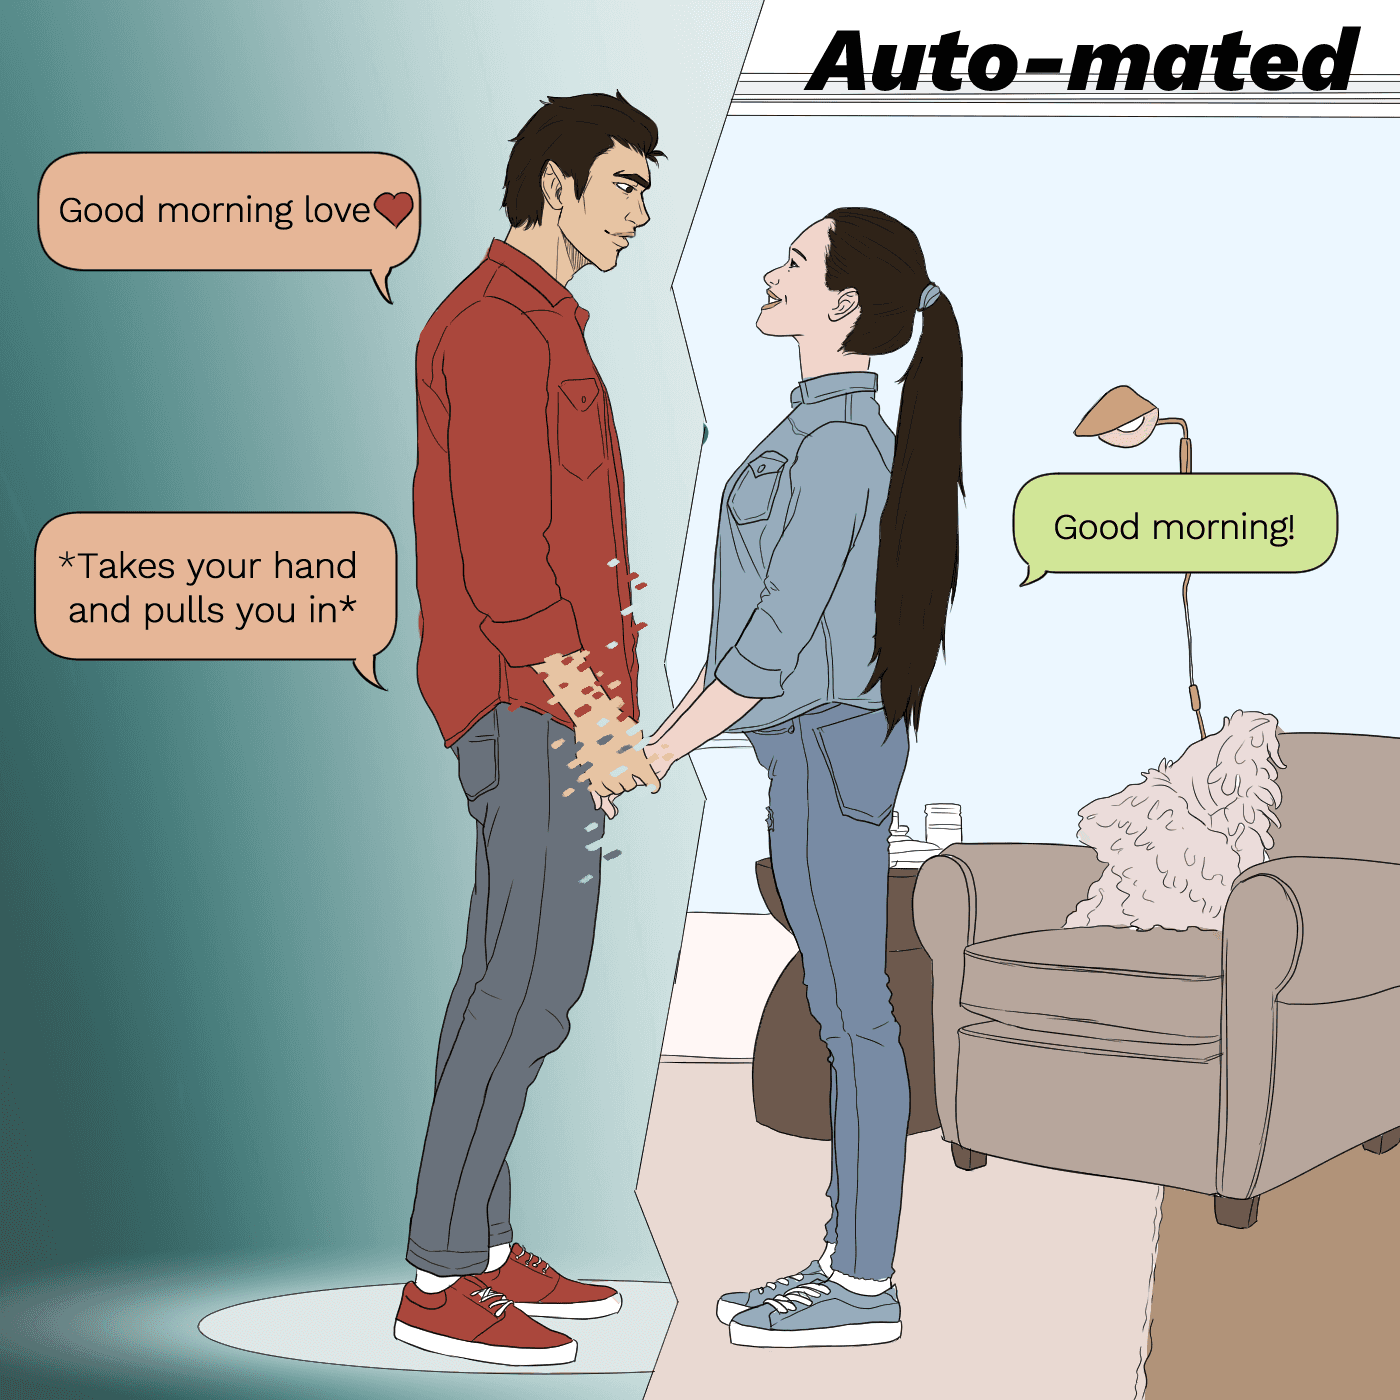 Thumbnail for "[Simulated Part One] Auto-mated: When A Bot Becomes Your Boo".